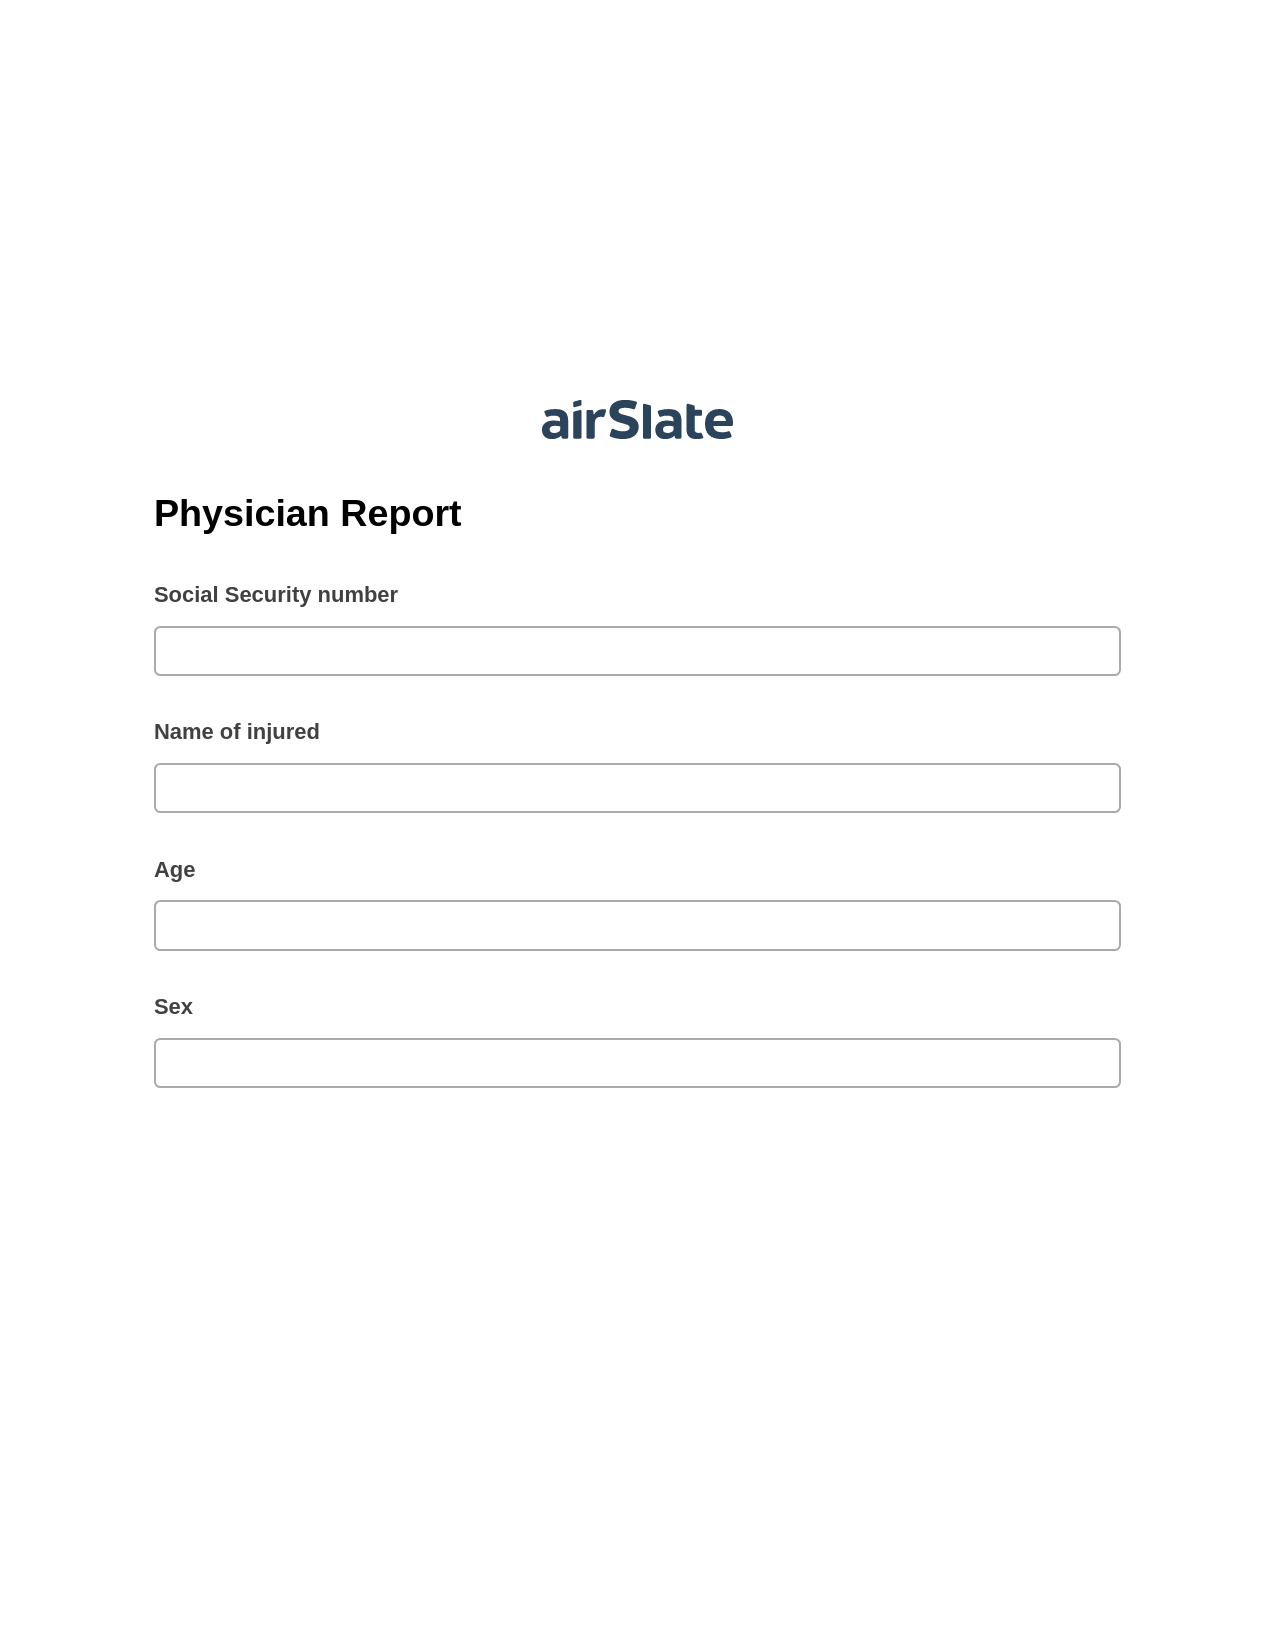 Physician Report Pre-fill Dropdowns from CSV file Bot, Remove Slate Bot, Post-finish Document Bot